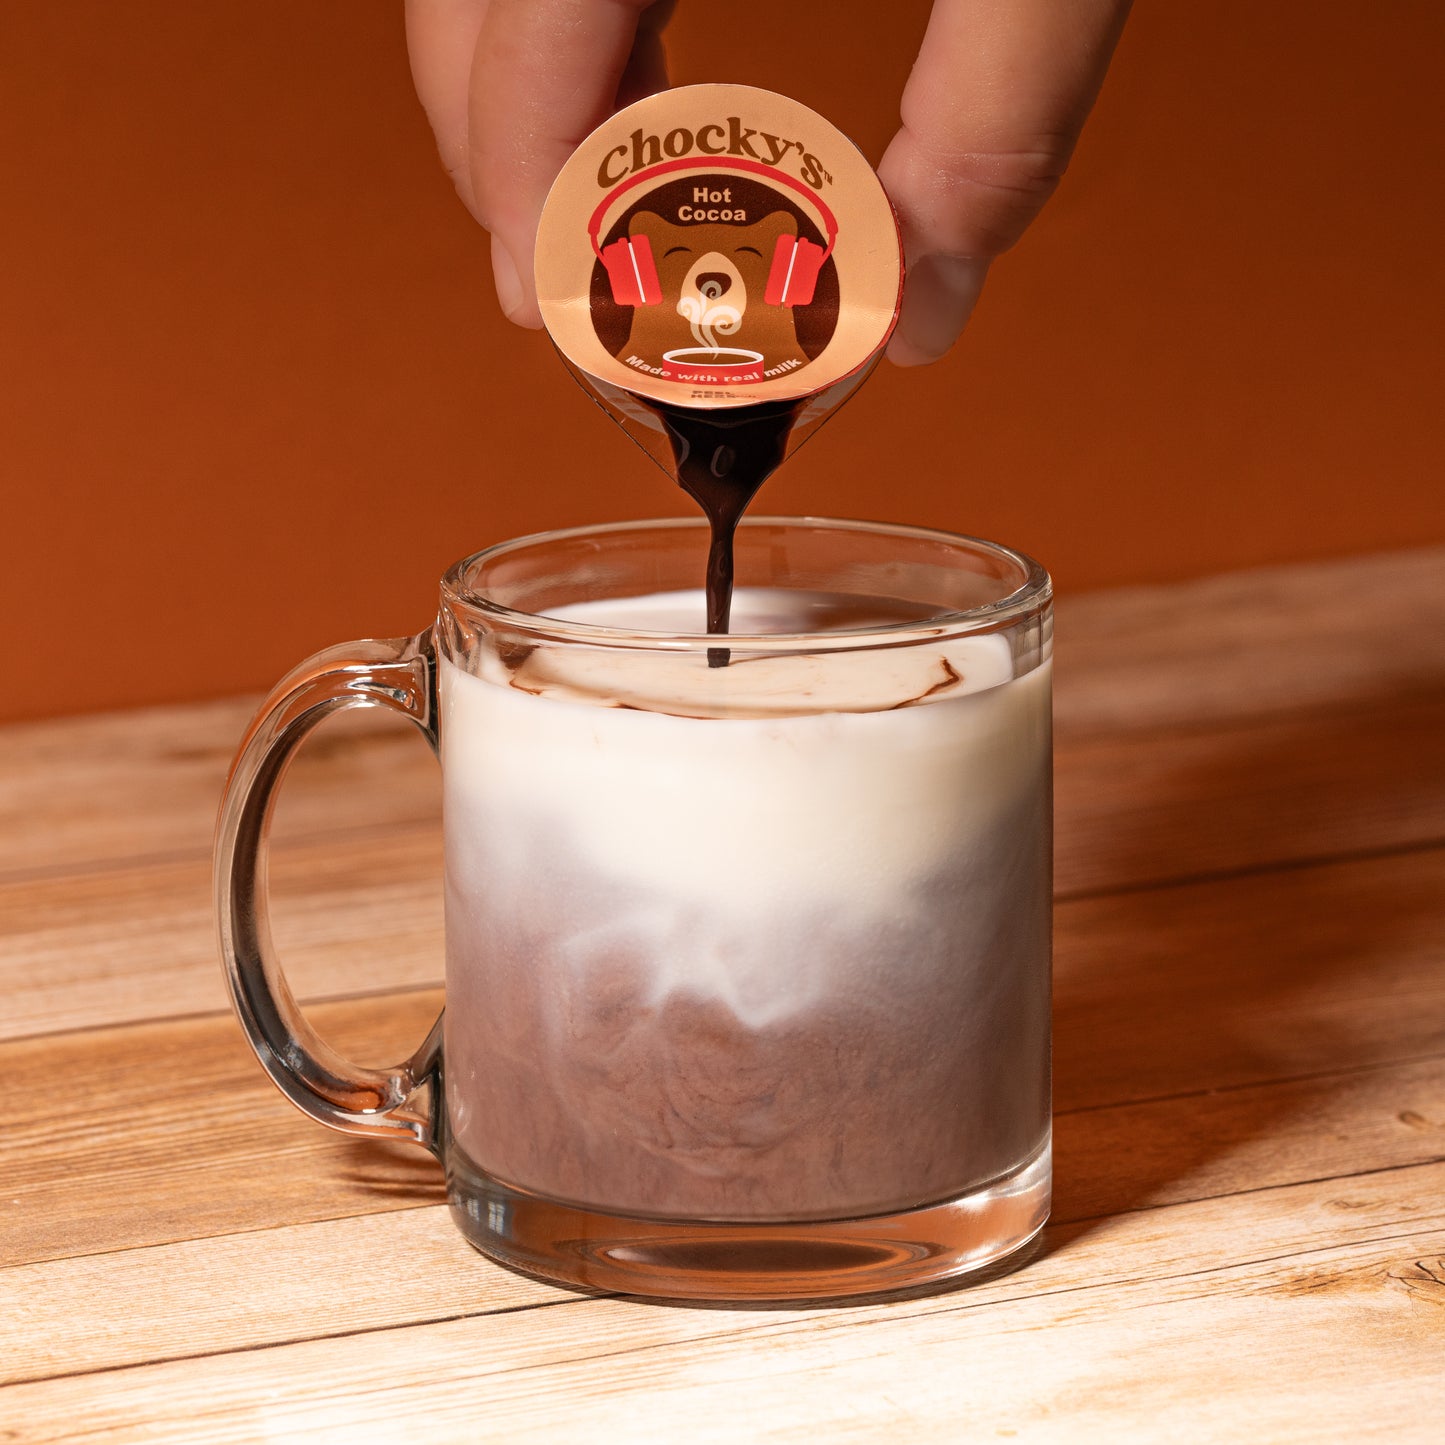 Chocky's Hot Cocoa - Made with Real Milk